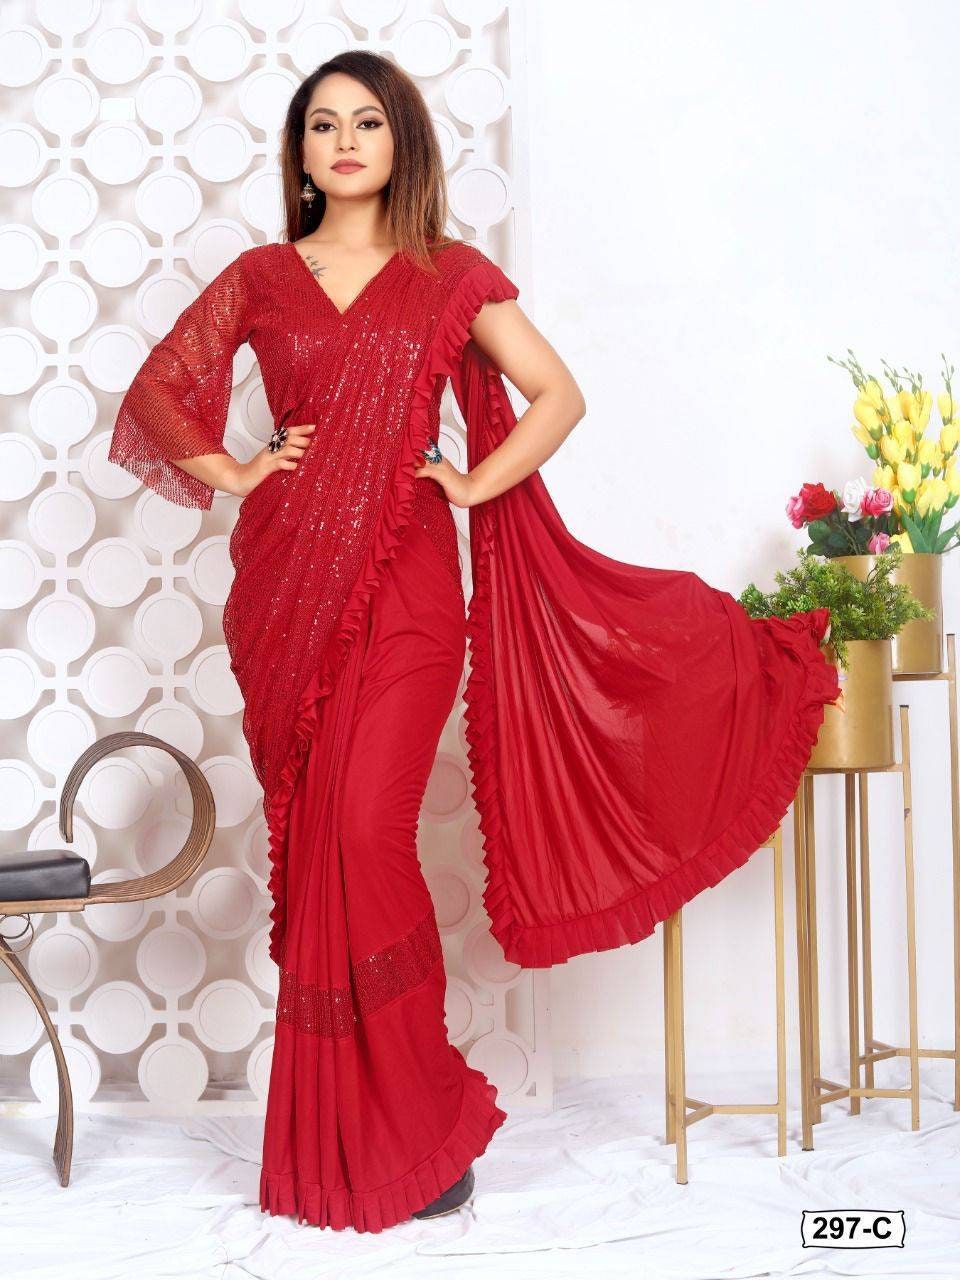 Shimmering Red - One Minute Saree ready to wear sarees, party wear saree, wedding saree for Christmas Half-and-Half, Ruffle saree